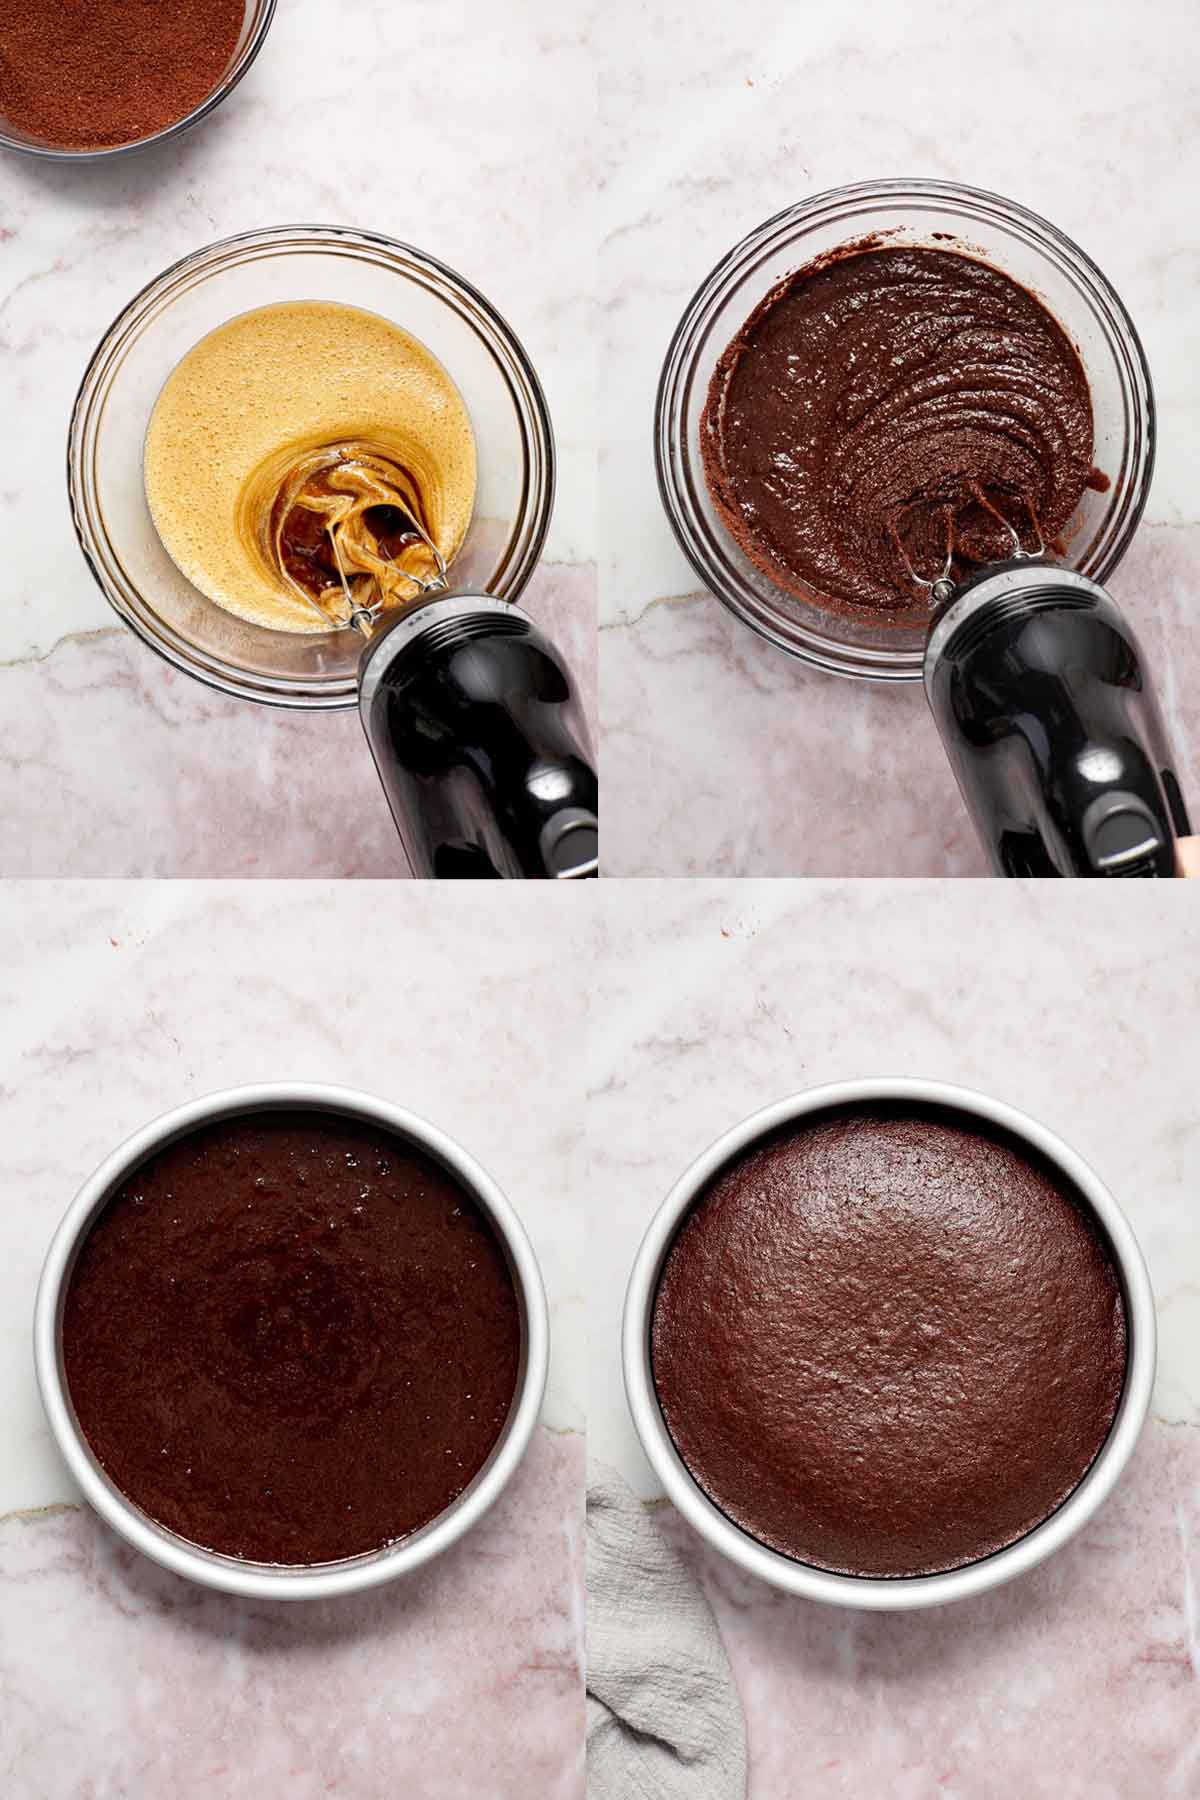 Collage of 4 images showing the process of the batter being mixed together and the cake baked in the pan.